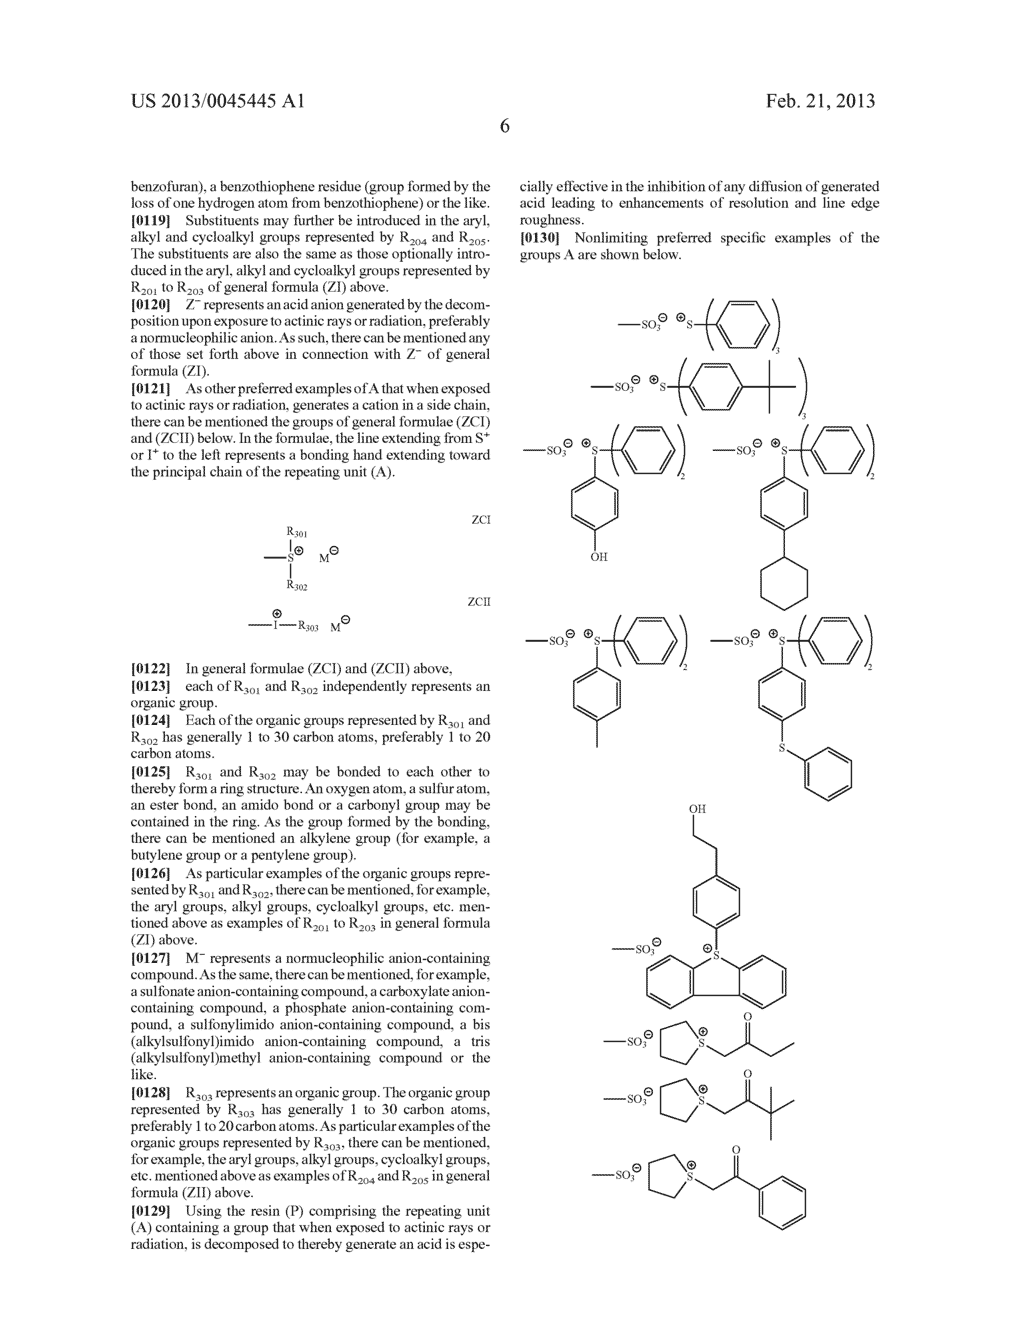 ACTINIC-RAY- OR RADIATION-SENSITIVE RESIN COMPOSITION, ACTINIC-RAY- OR     RADIATION-SENSITIVE RESIN FILM THEREFROM AND METHOD OF FORMING PATTERN     USING THE COMPOSITION - diagram, schematic, and image 07